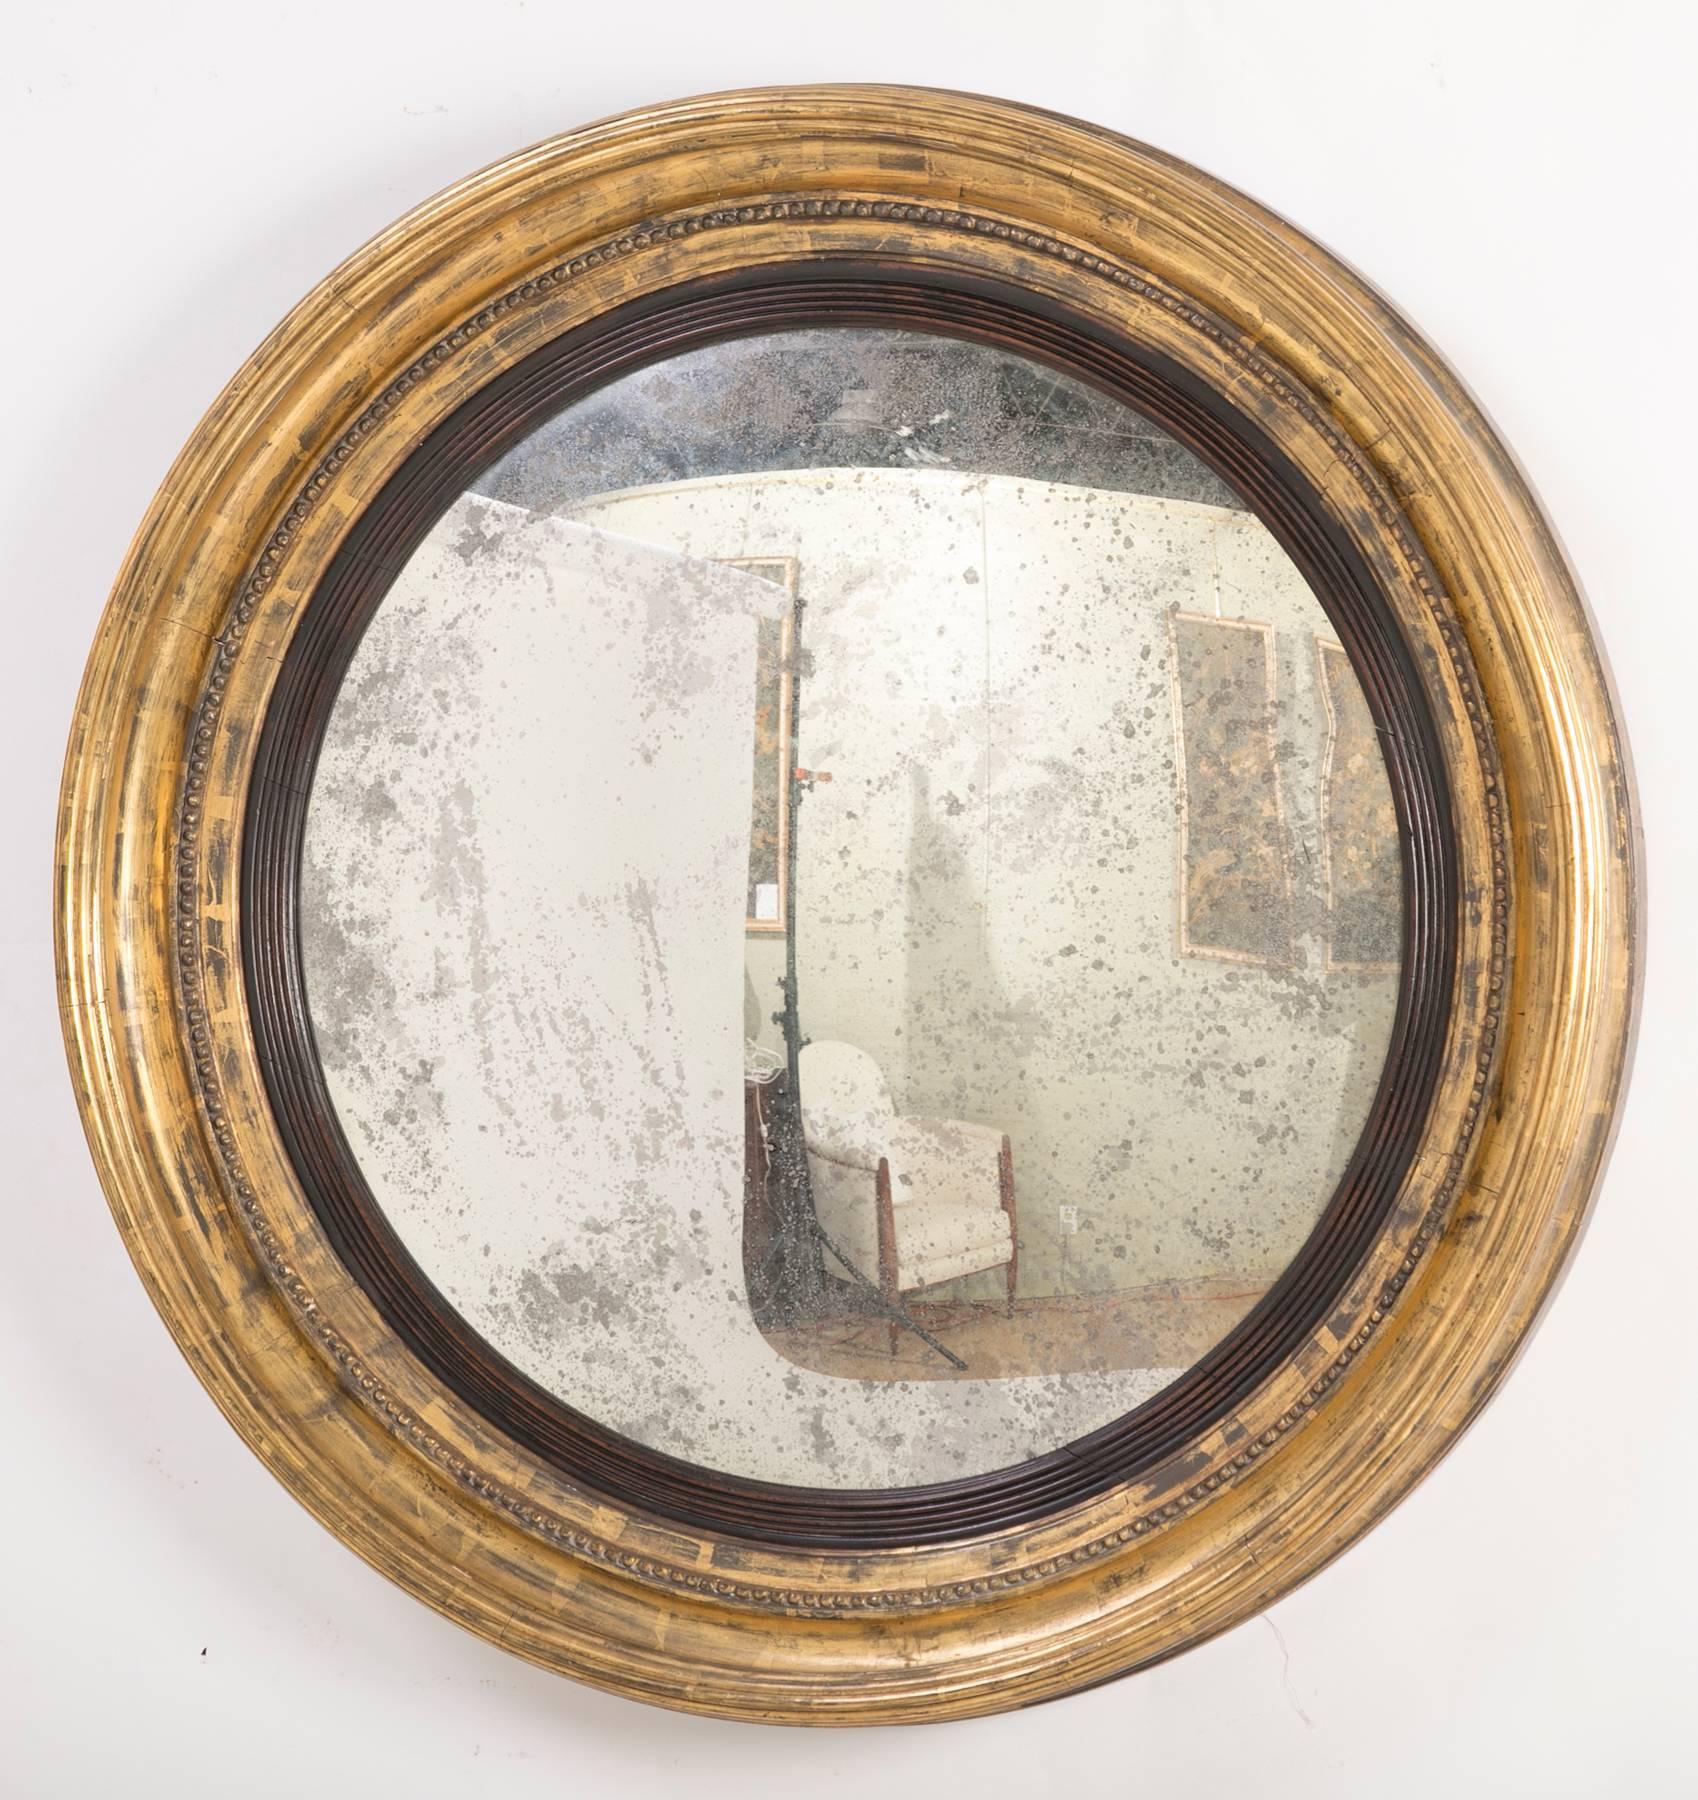 An impressive pair of English Regency gilt and ebonized wood bullseye mirrors. Rare to find a pair of these of this size and quality. giltwood frames with inner ebonized wood molding.

Measures: 38 inches diameter 4.5 inches deep.